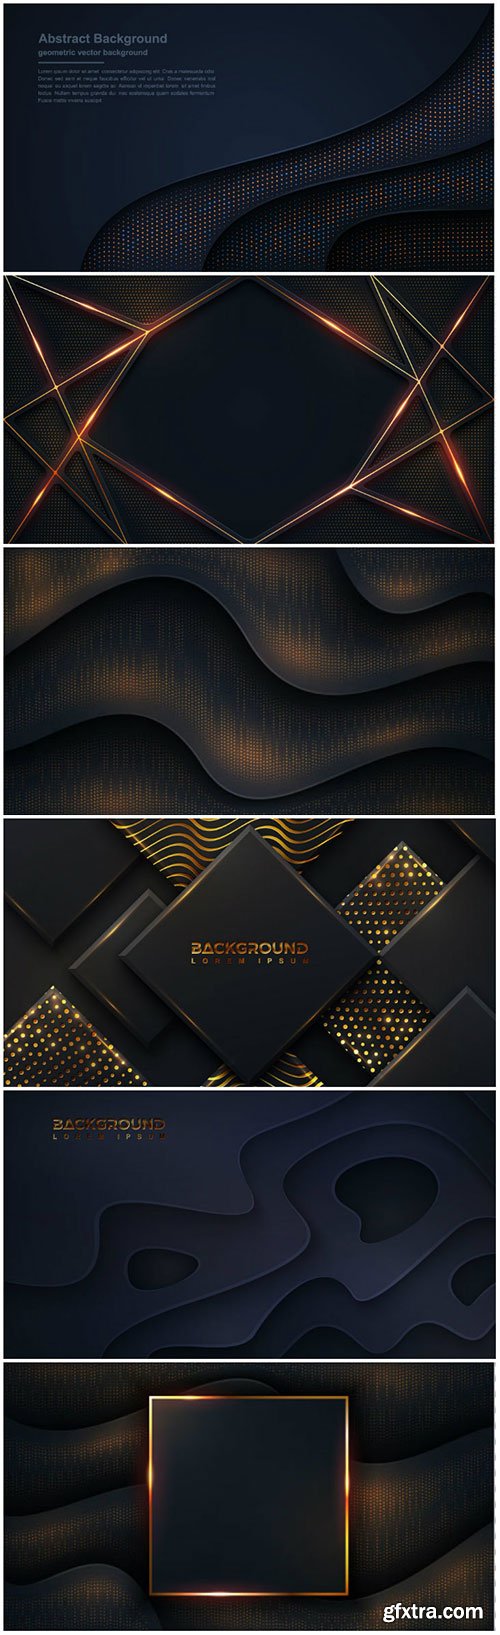 Luxury dark background textured and wavy with a combination of shining dots